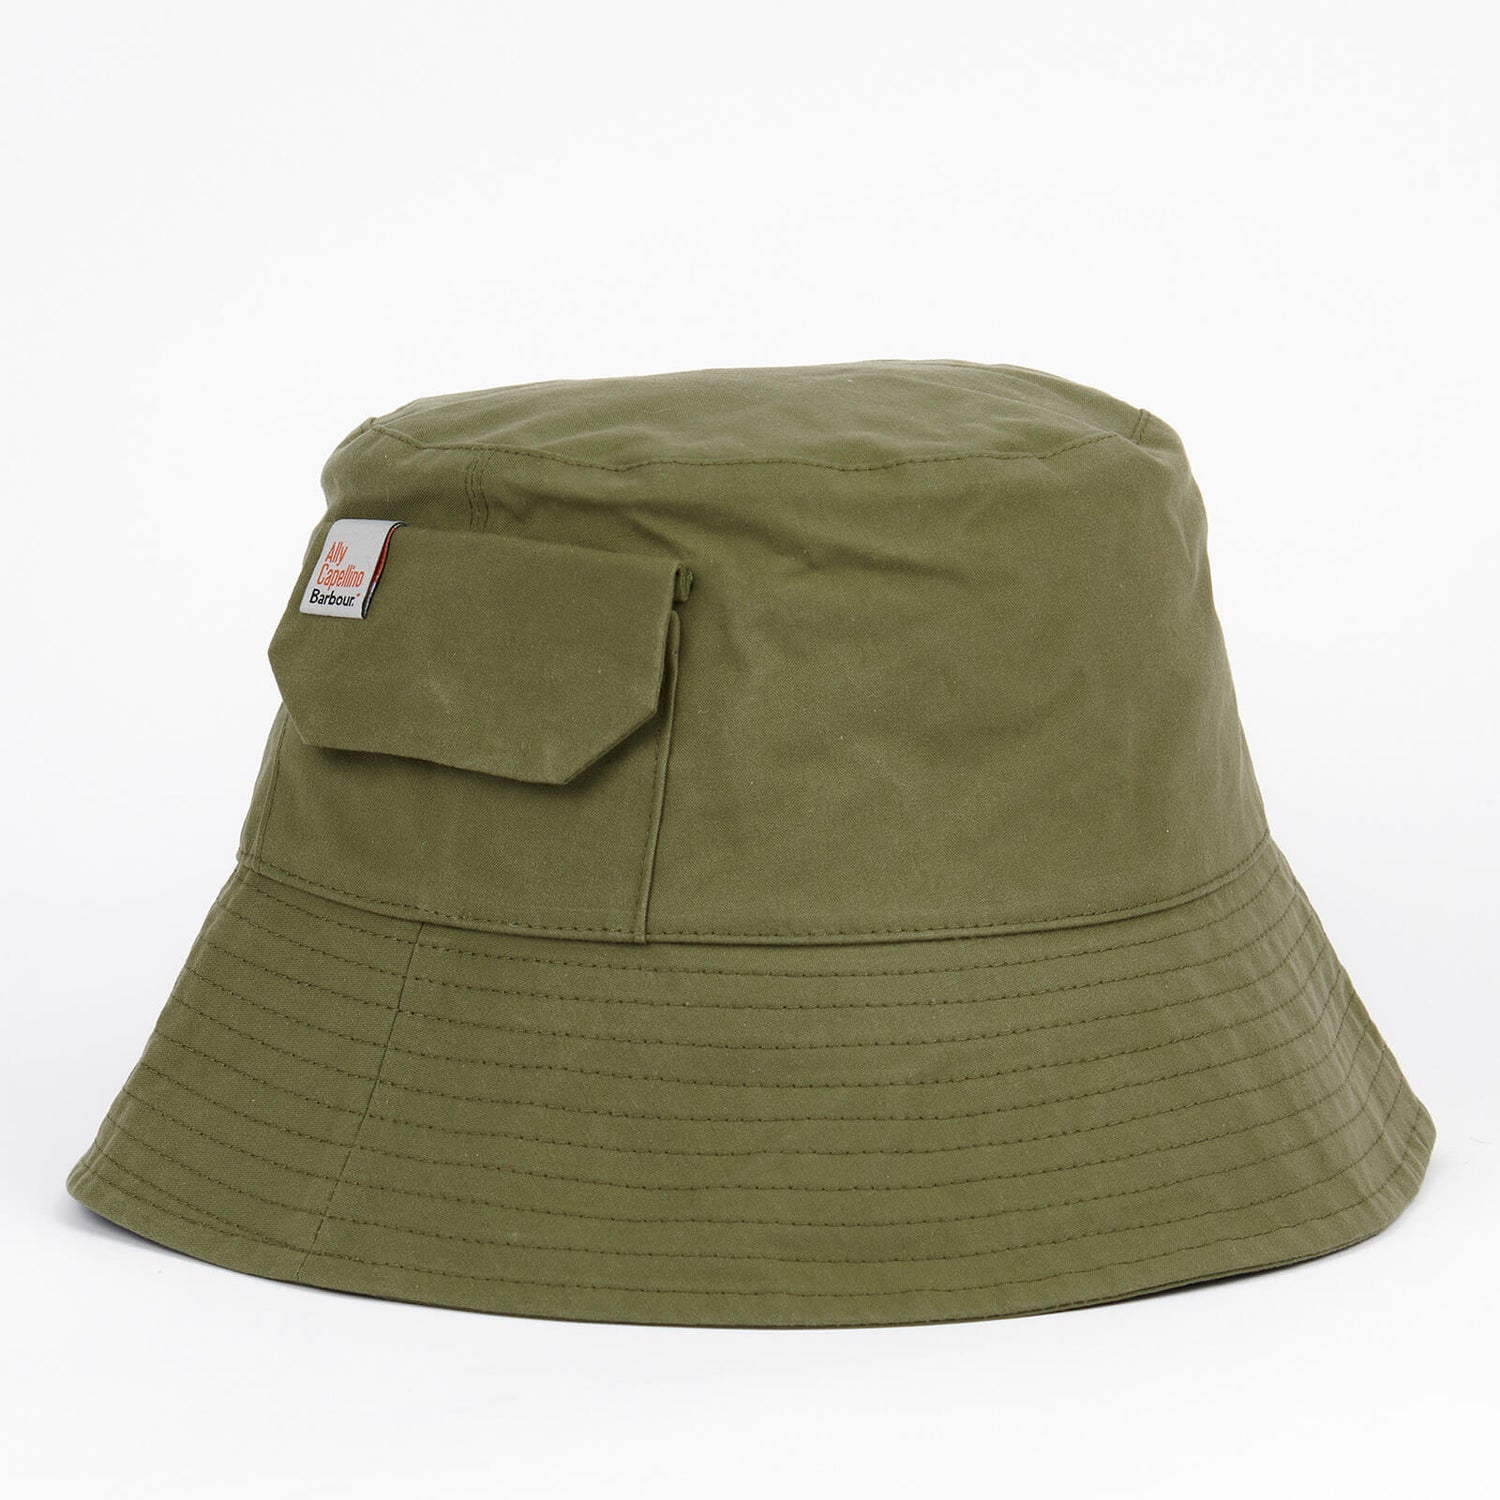 Barbour X Ally Capellino Men's Sweep Sports Hat - Army Green - M